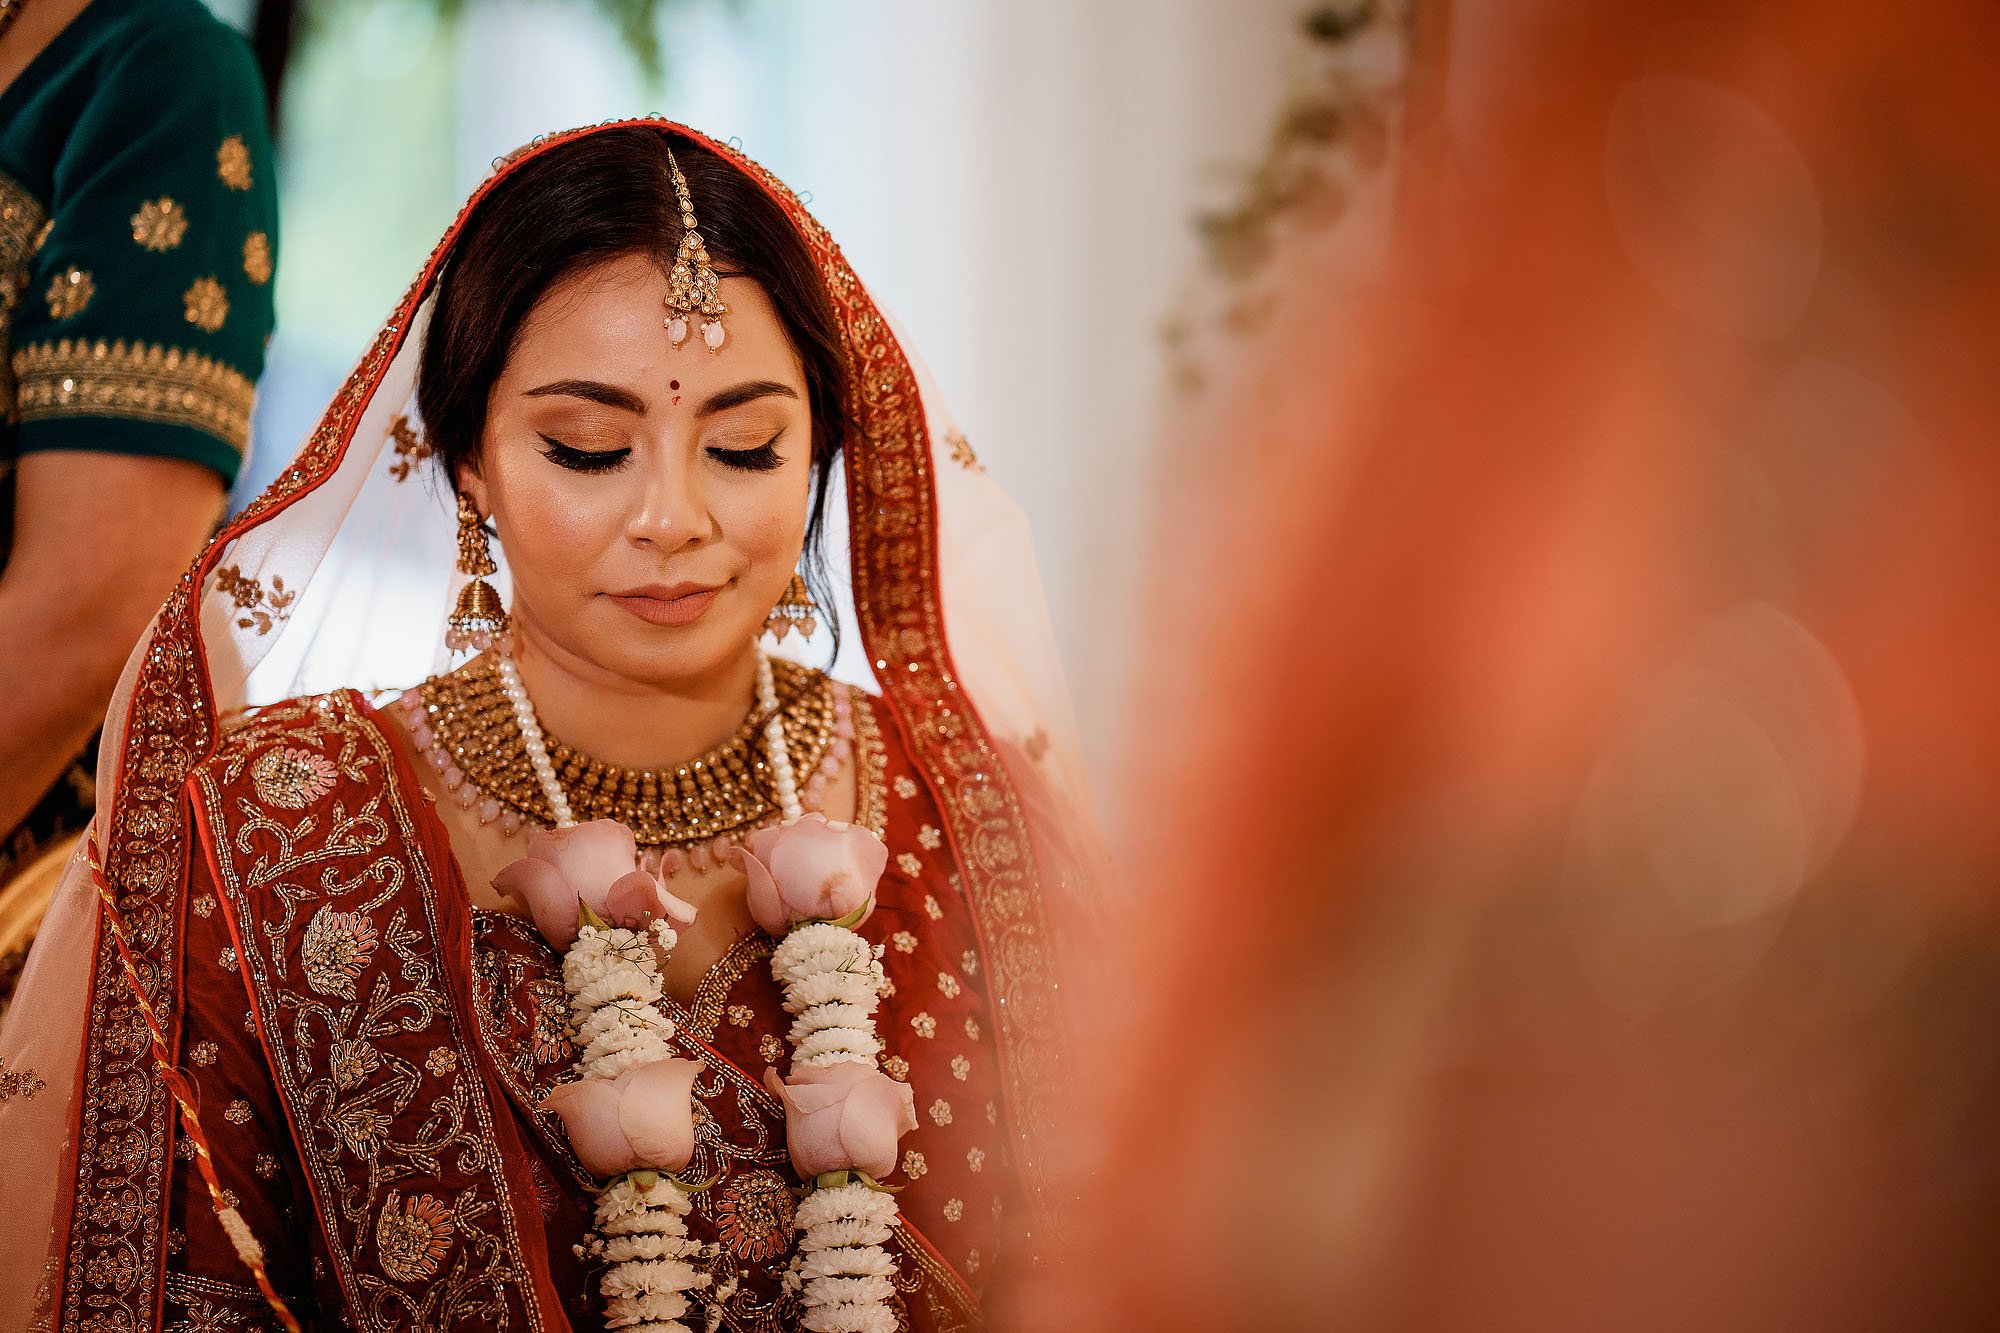 Amazing indian wedding photography at winstanley house leicester